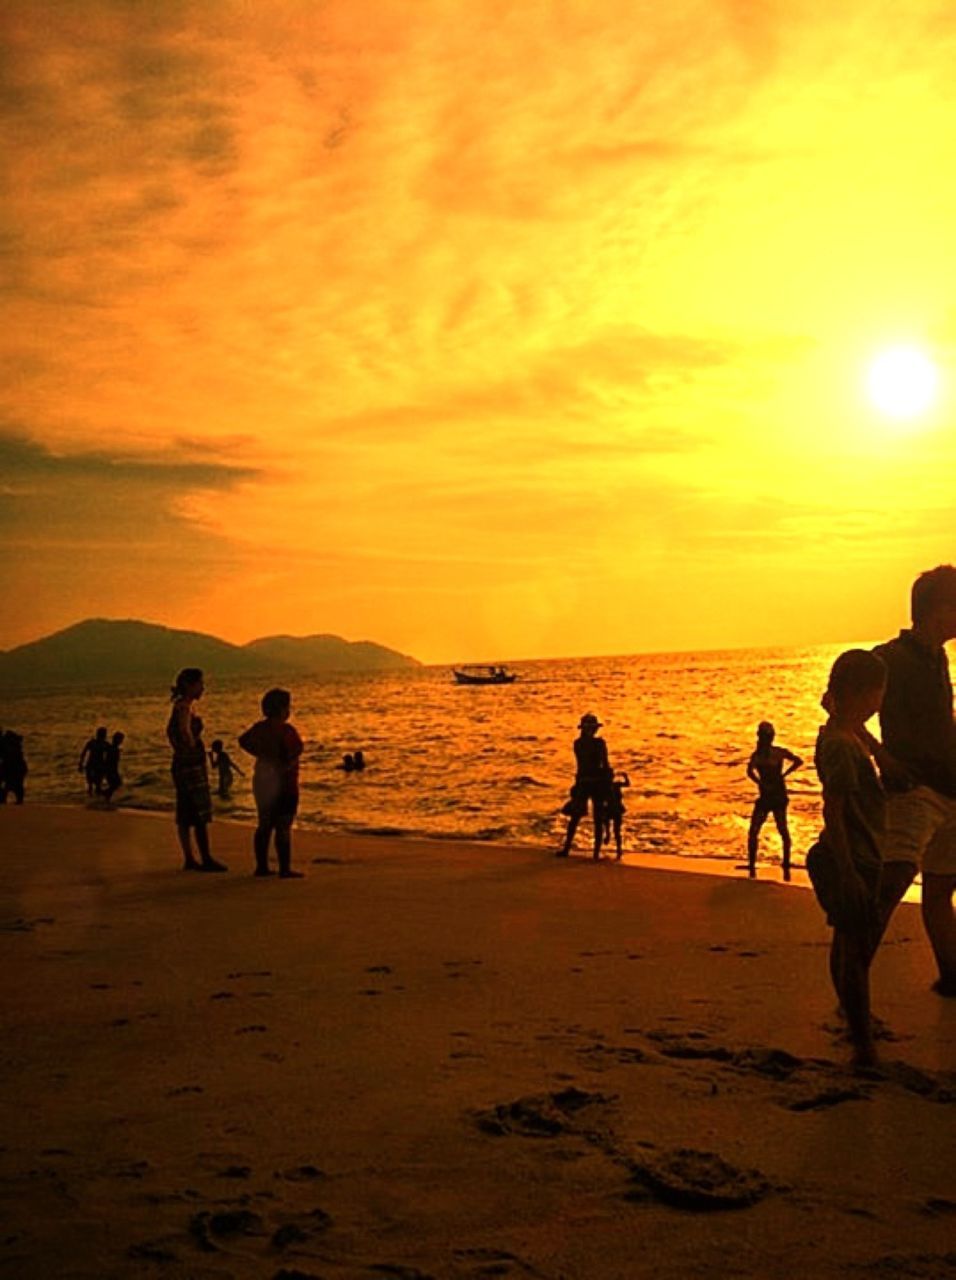 sunset, sea, beach, water, scenics, beauty in nature, sky, silhouette, orange color, sun, shore, vacations, tranquil scene, leisure activity, horizon over water, tranquility, lifestyles, large group of people, idyllic